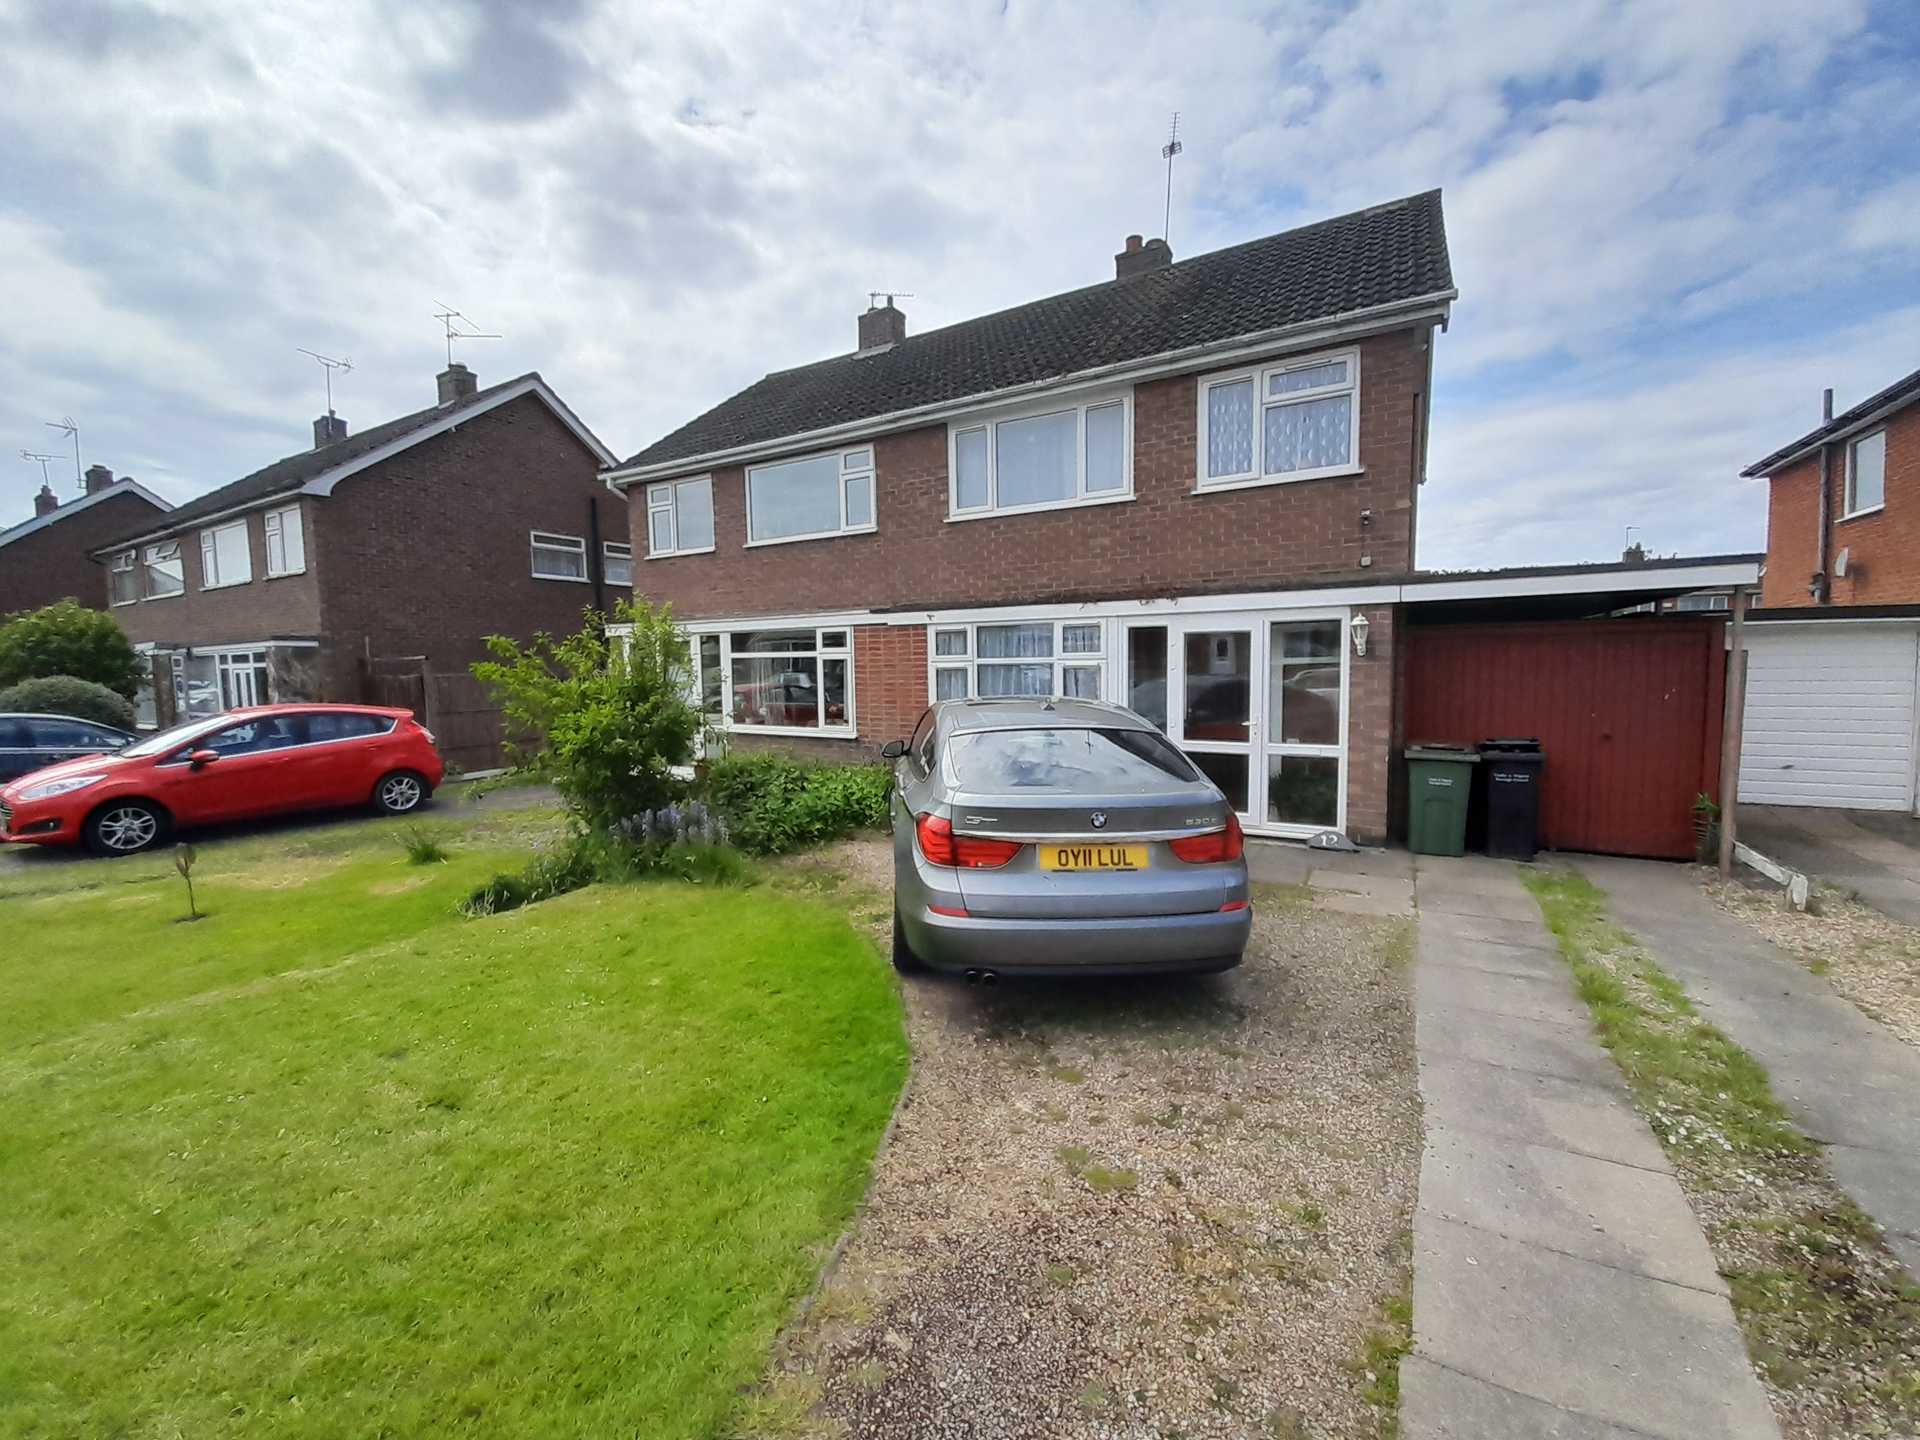 House in Oadby, Leicestershire 12371556